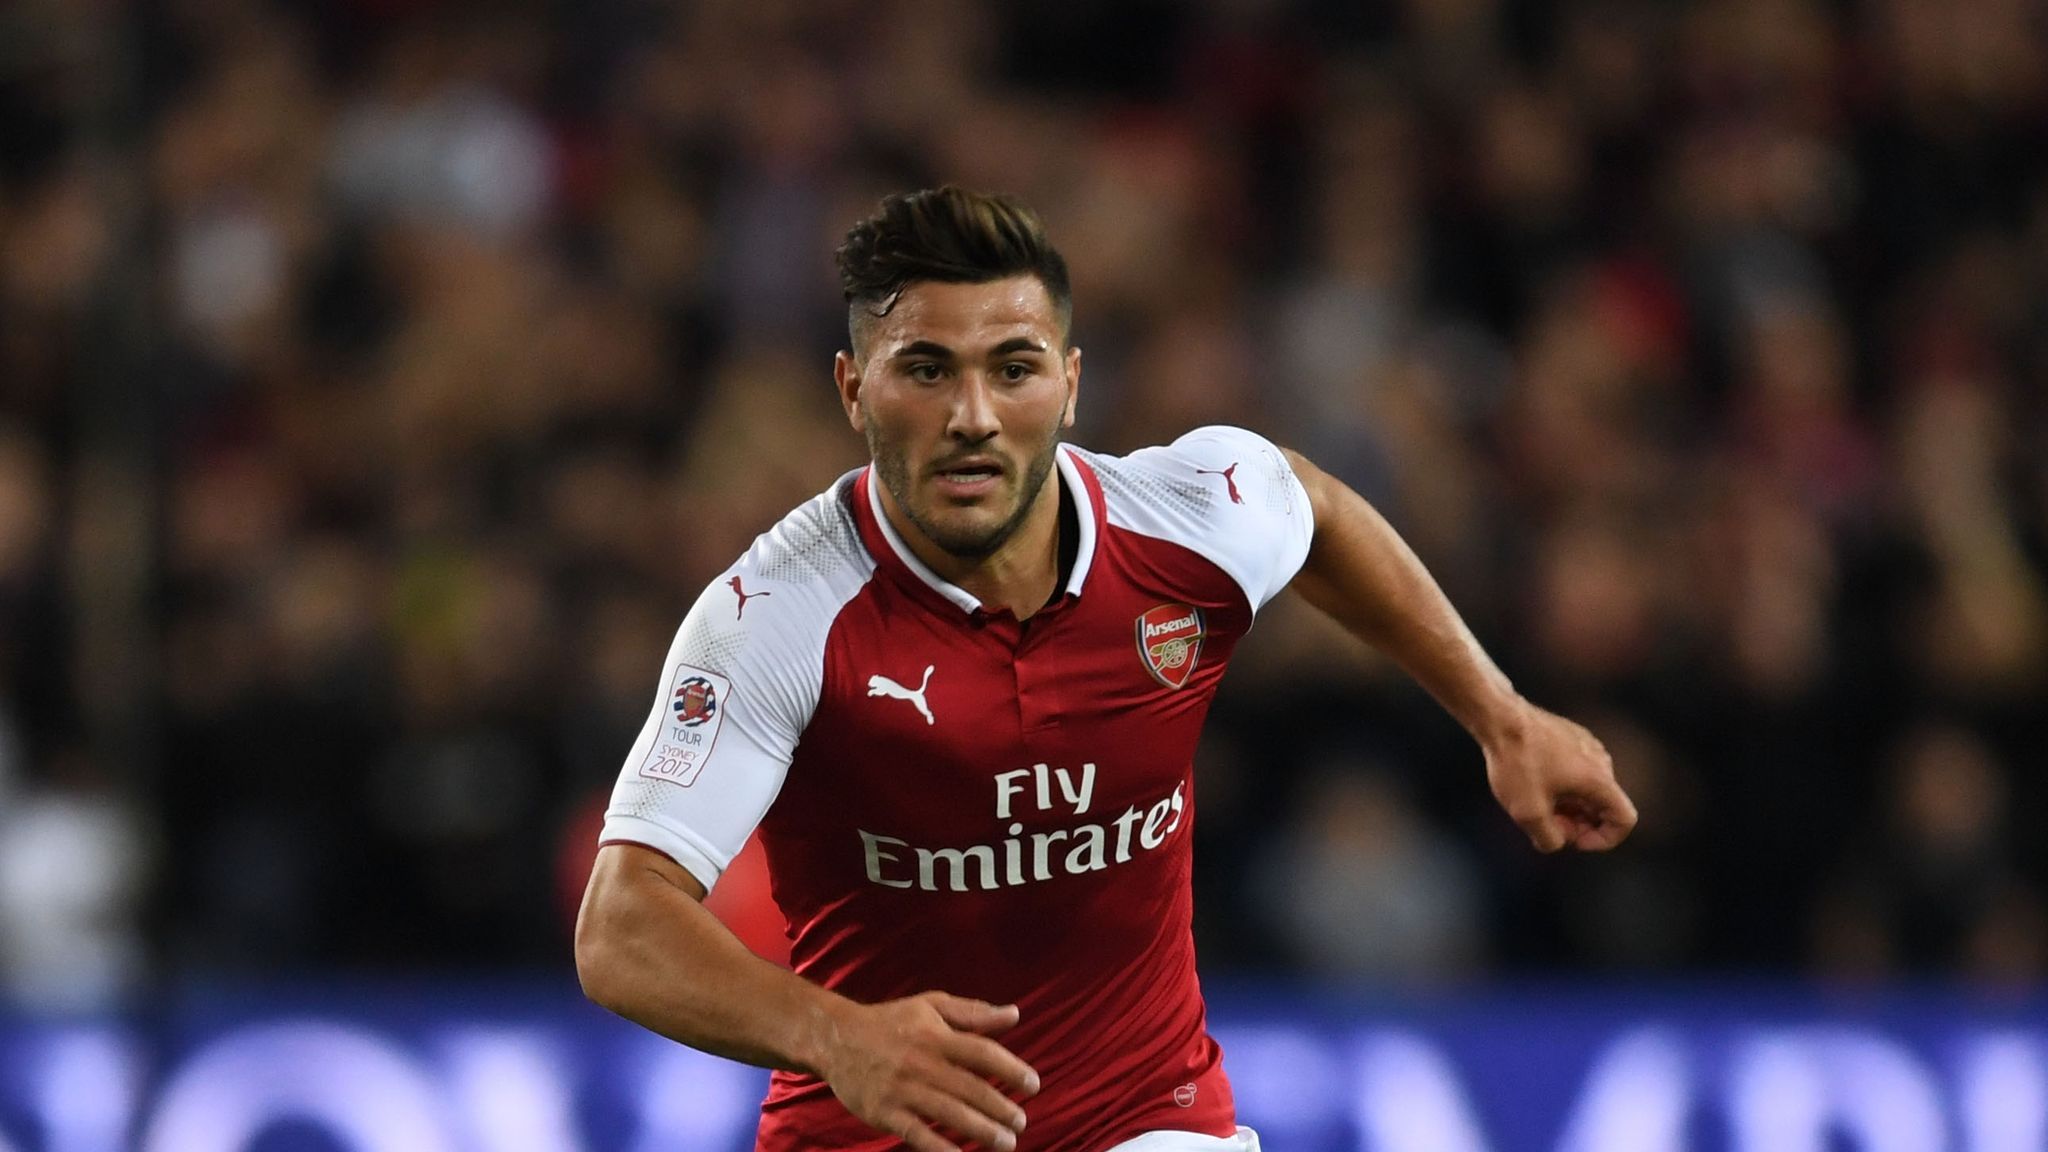 Sead Kolasinac to Arsenal: Why he is a perfect fit for the Premier